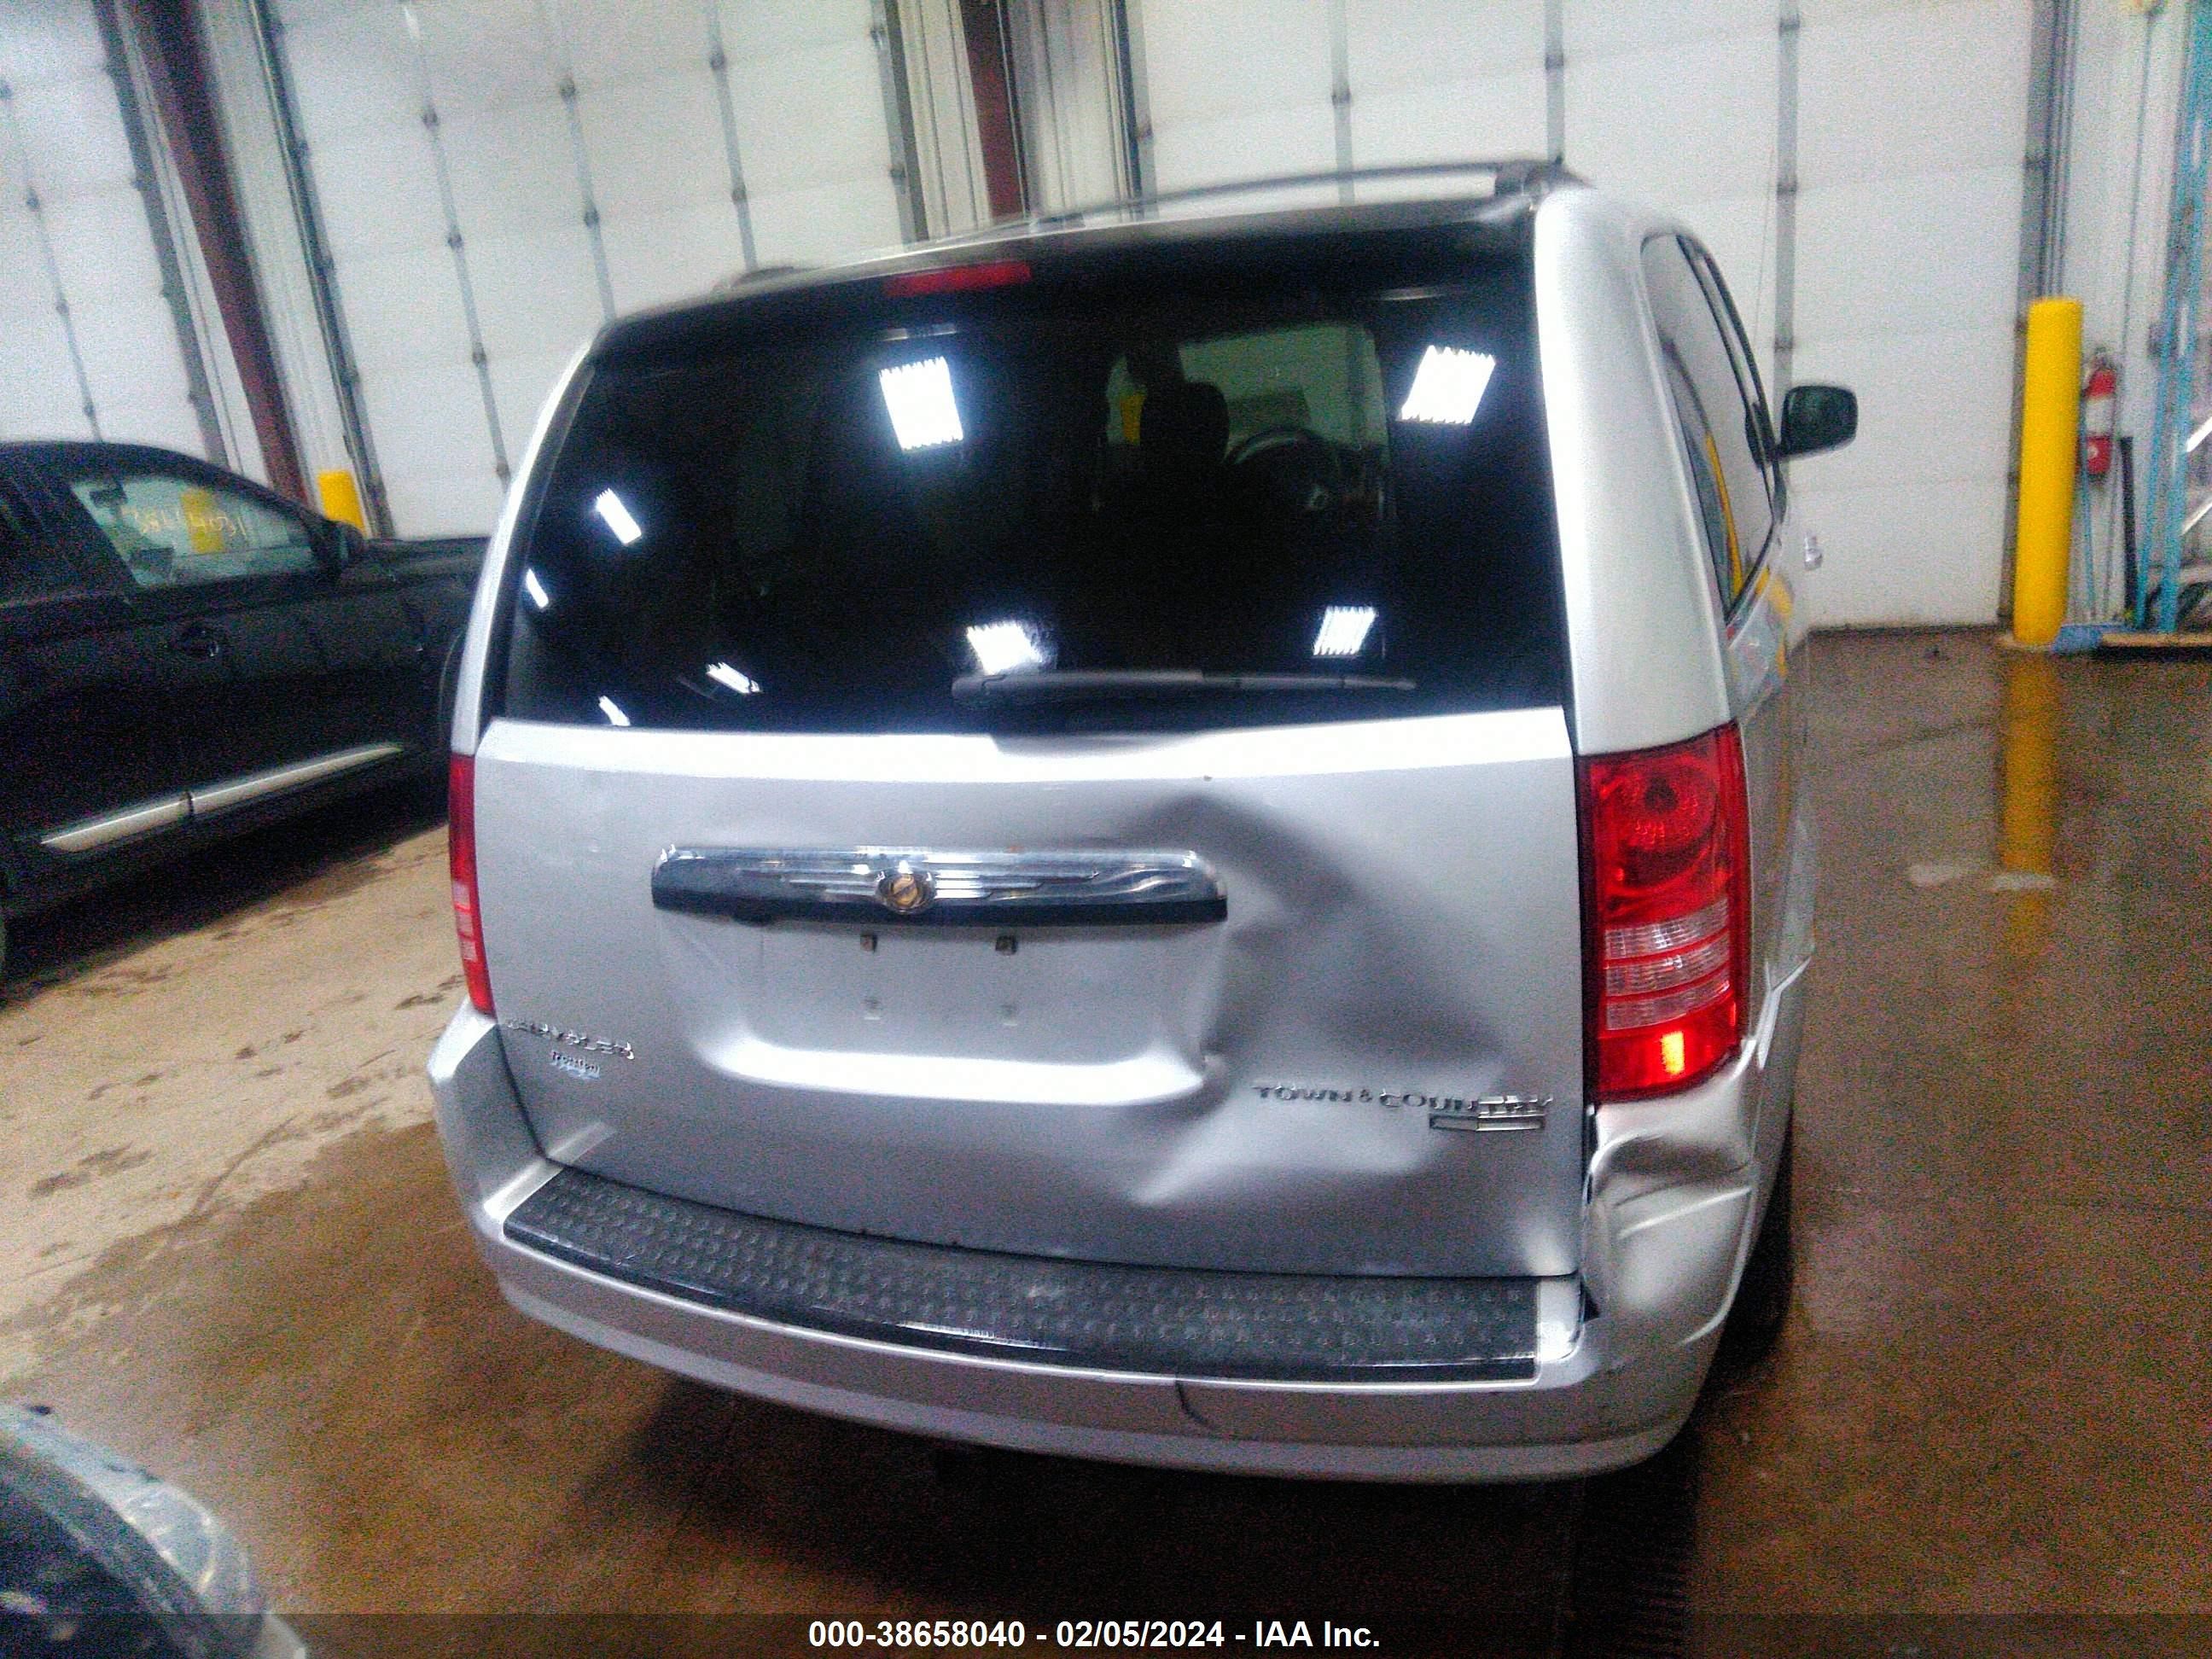 Photo 15 VIN: 2A8HR54109R630671 - CHRYSLER TOWN & COUNTRY 